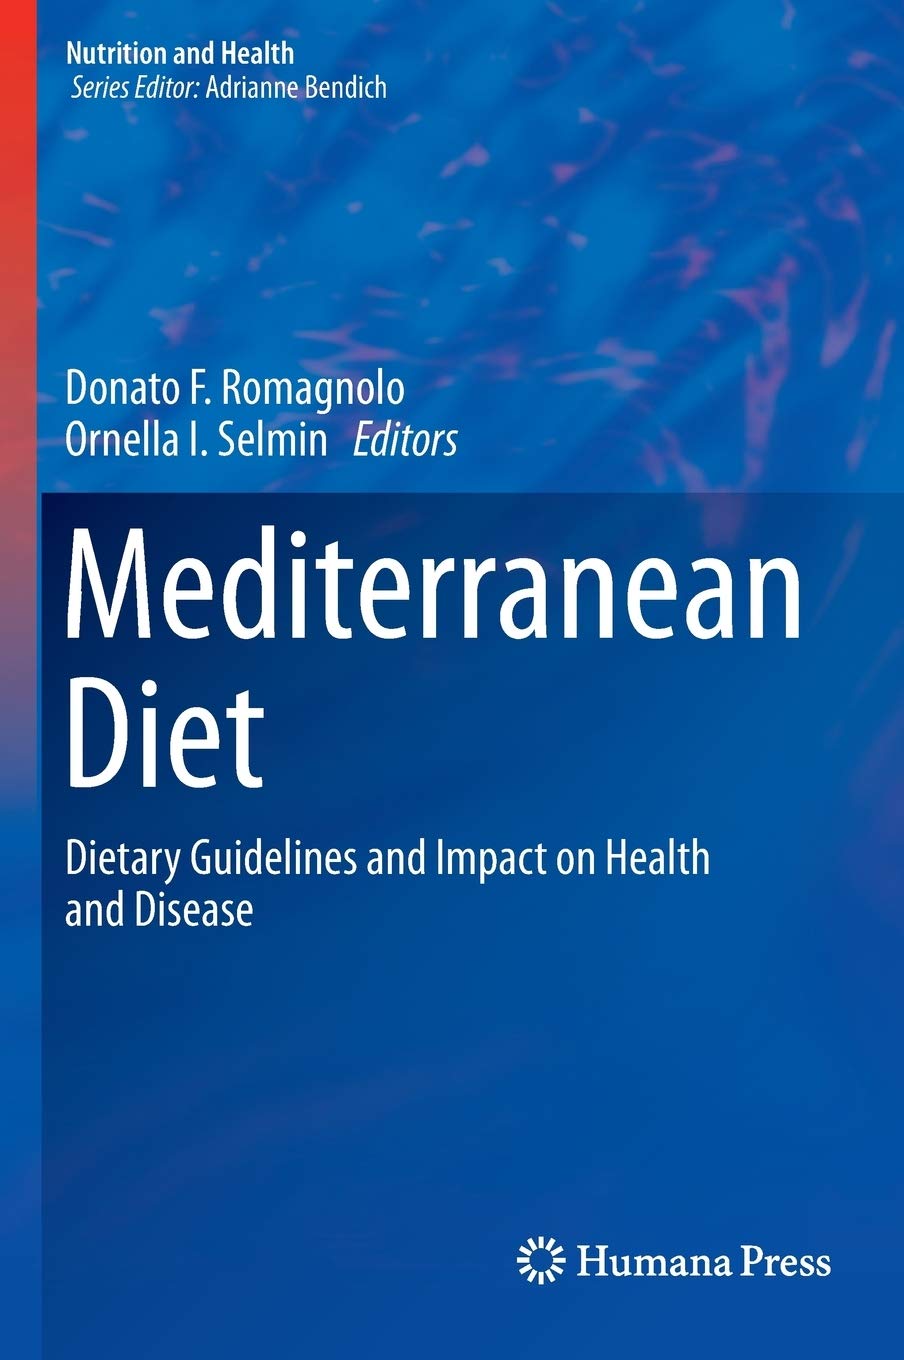 Mediterranean Diet: Dietary Guidelines and Impact on Health and Disease (Nutrition and Health)